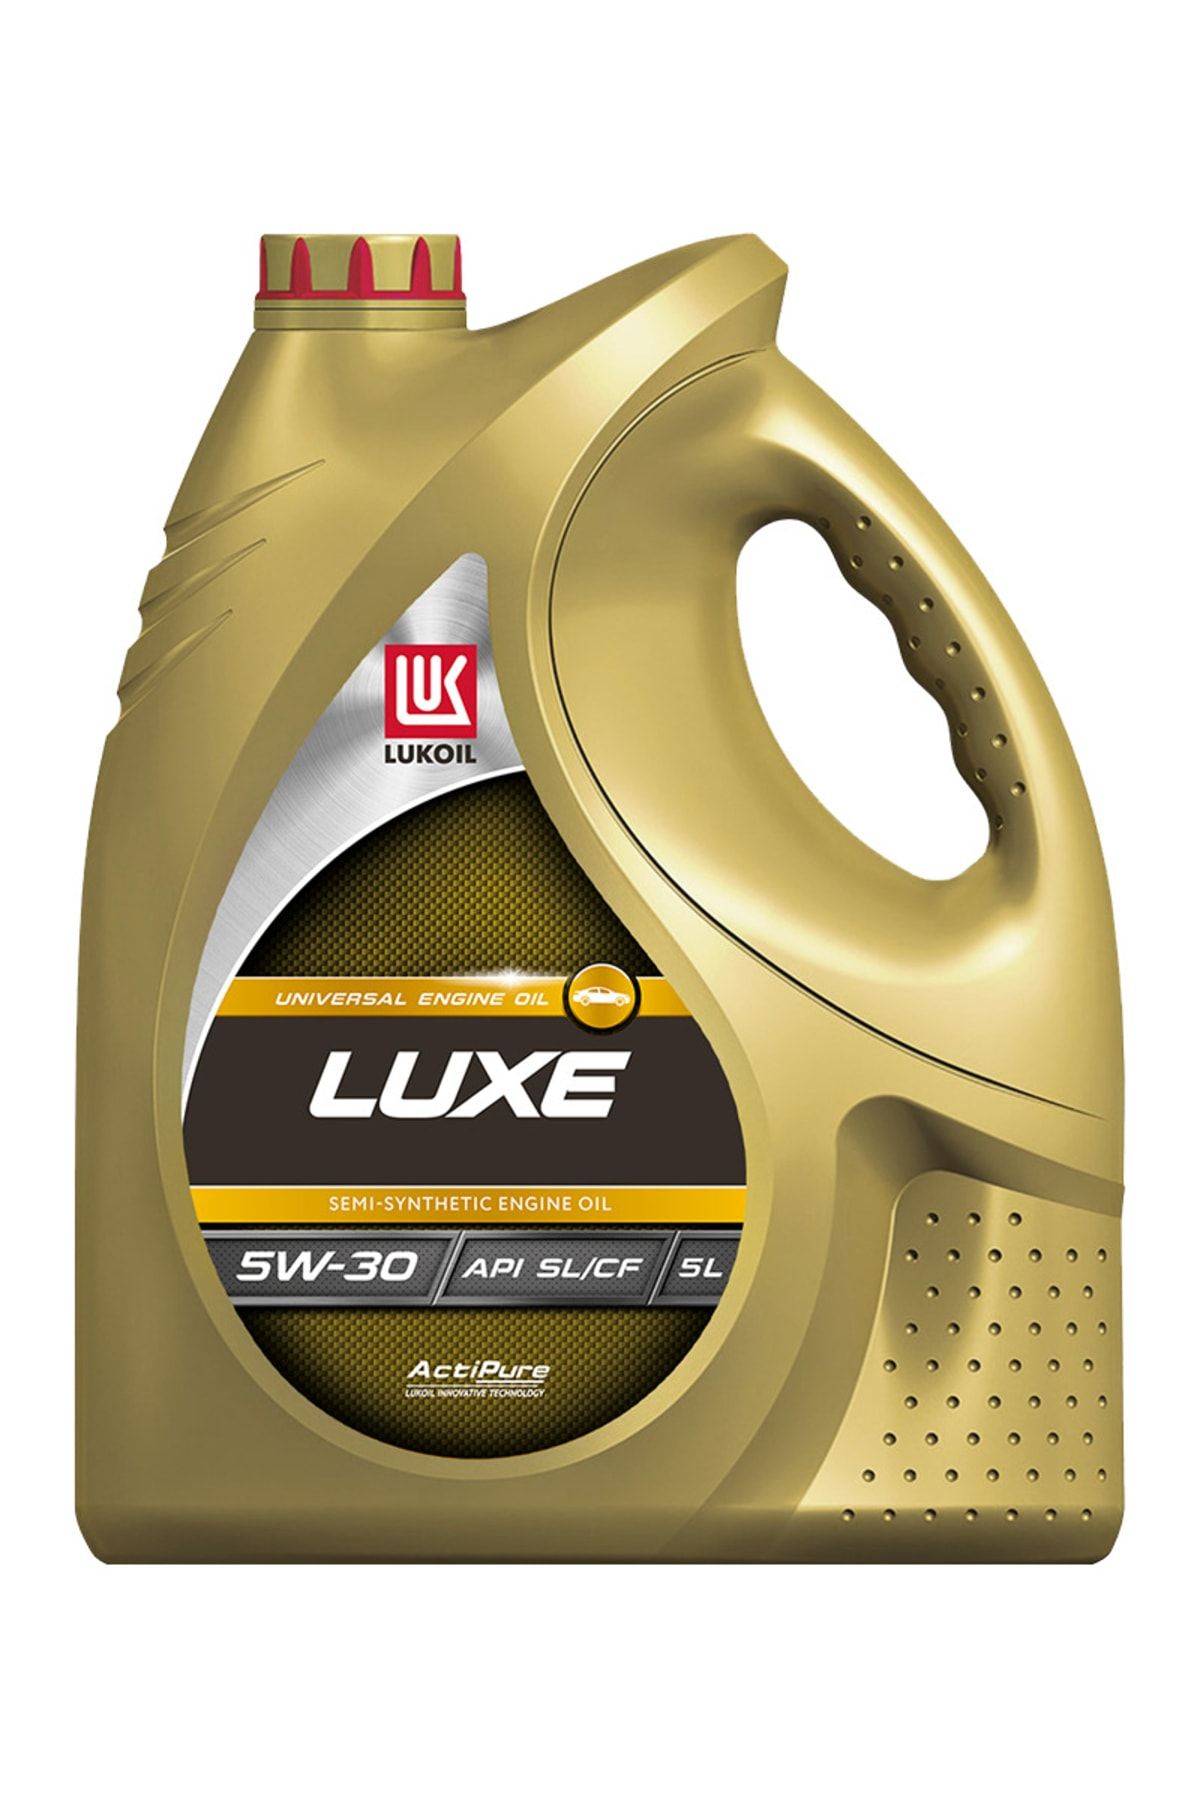 Масло лукойл 10w 40 cf. Lukoil Luxe 10w-40. Масло Лукойл 10w 40 полусинтетика. Лукойл Люкс SAE 10w-40, API SL/CF 5 Л. Лукойл Luxe 10w 40 полусинтетика.